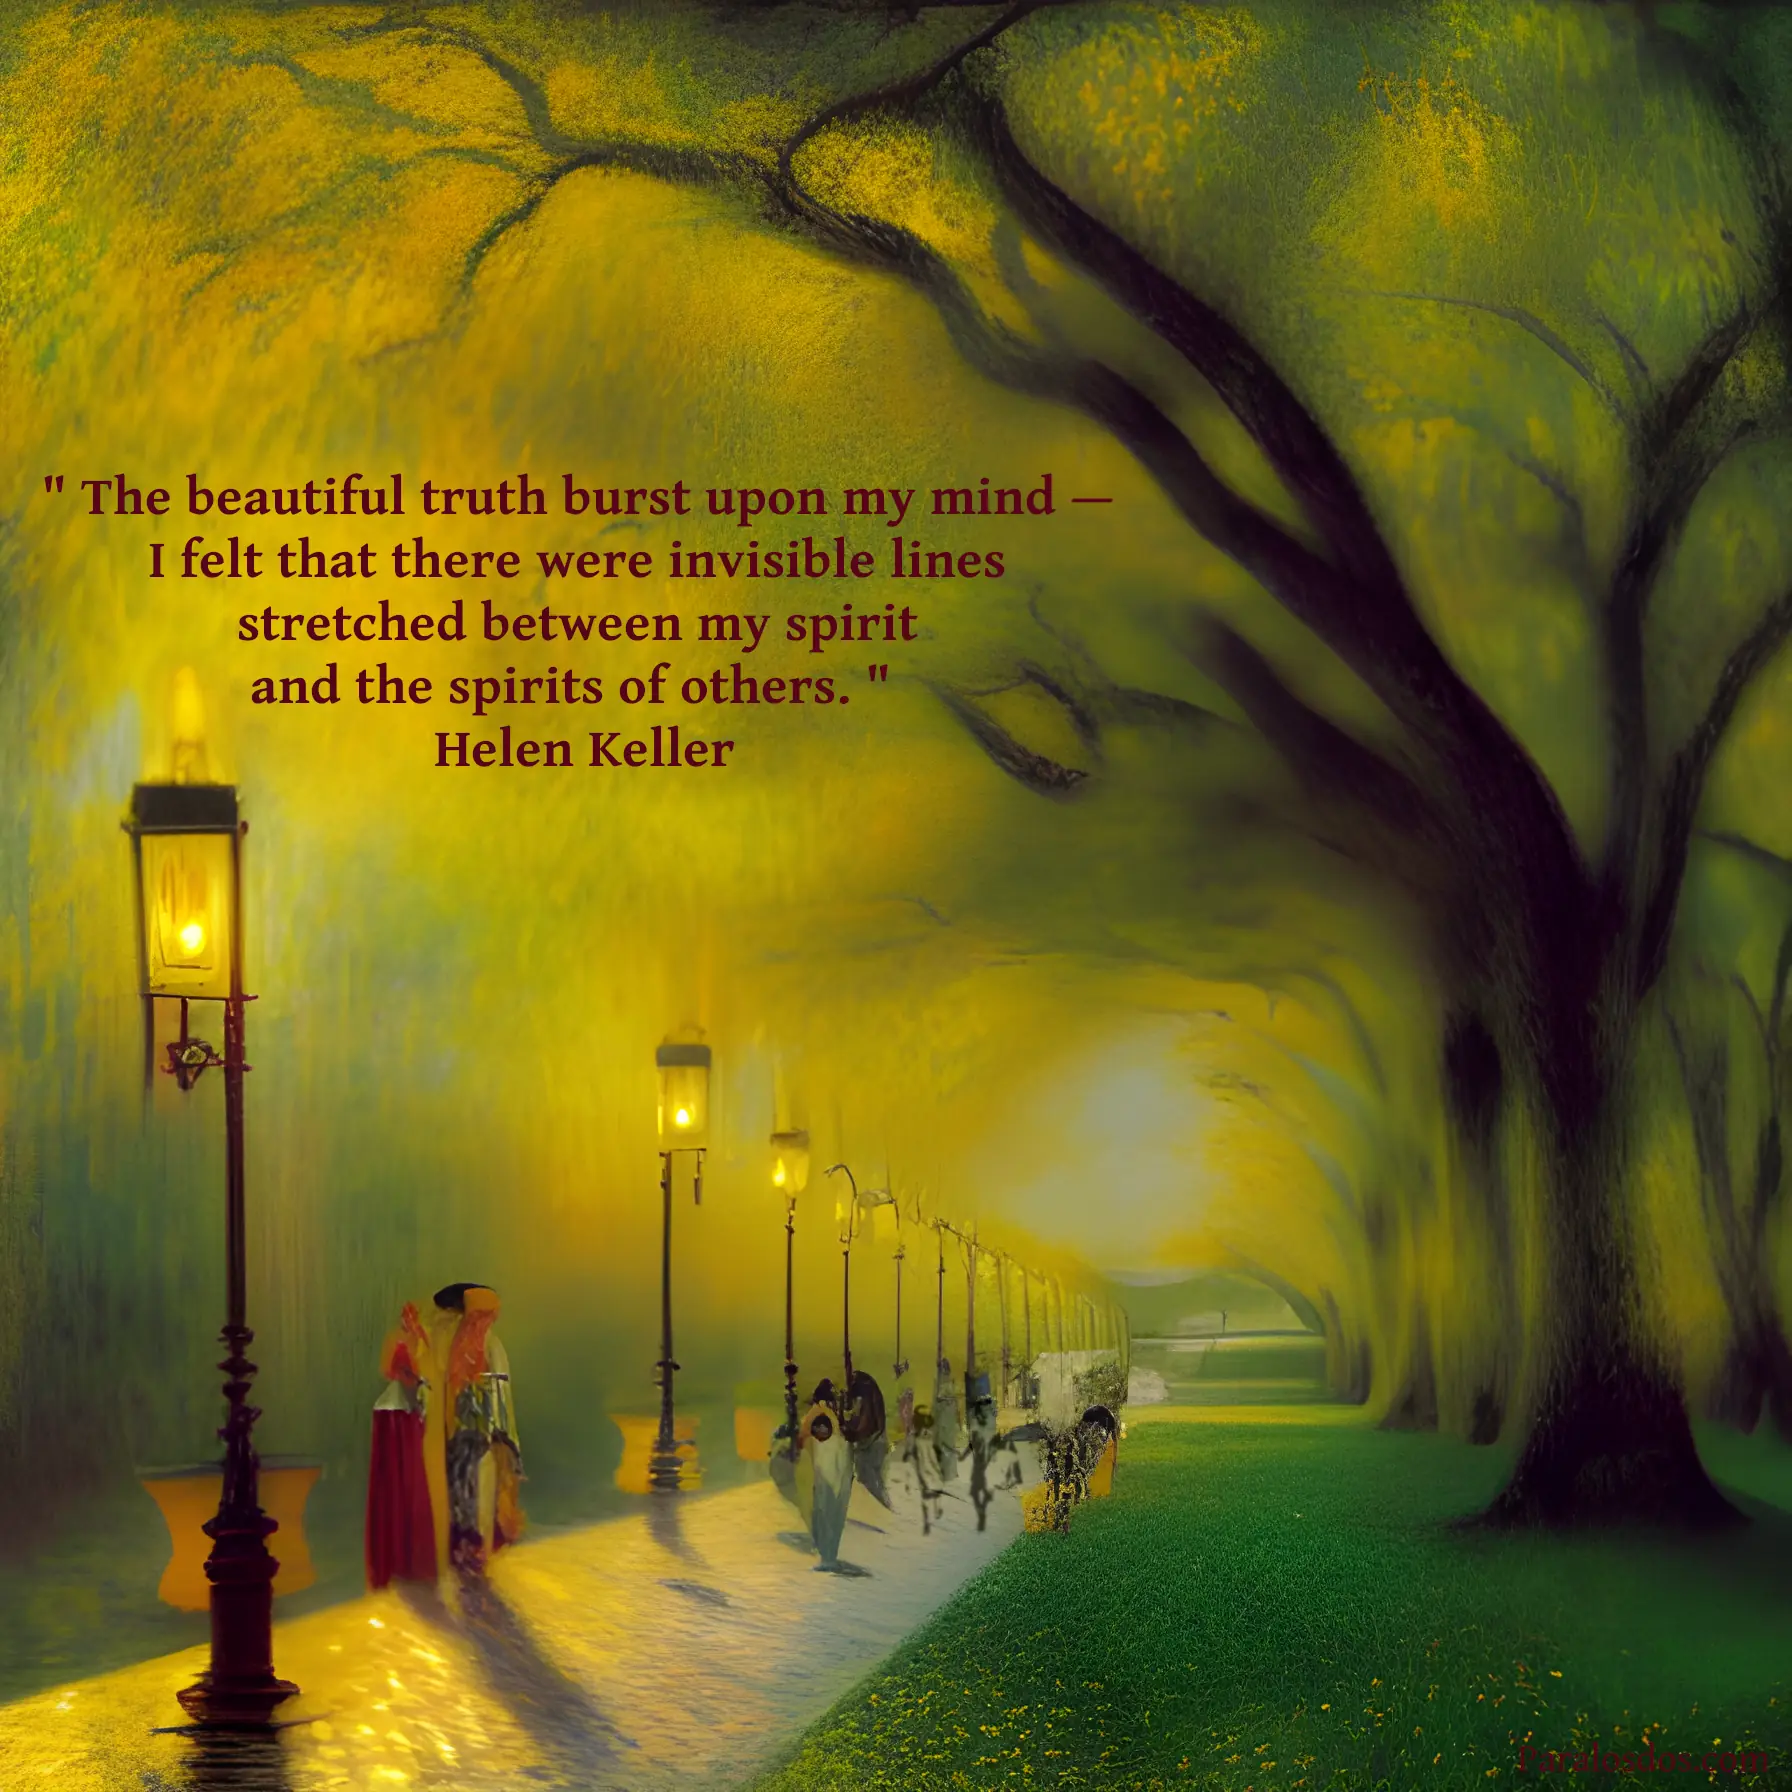 An artistic rendering of spirits walking on a lamplit and treelined path. The quote reads: " The beautiful truth burst upon my mind — I felt that there were invisible lines stretched between my spirit and the spirits of others. " Helen Keller